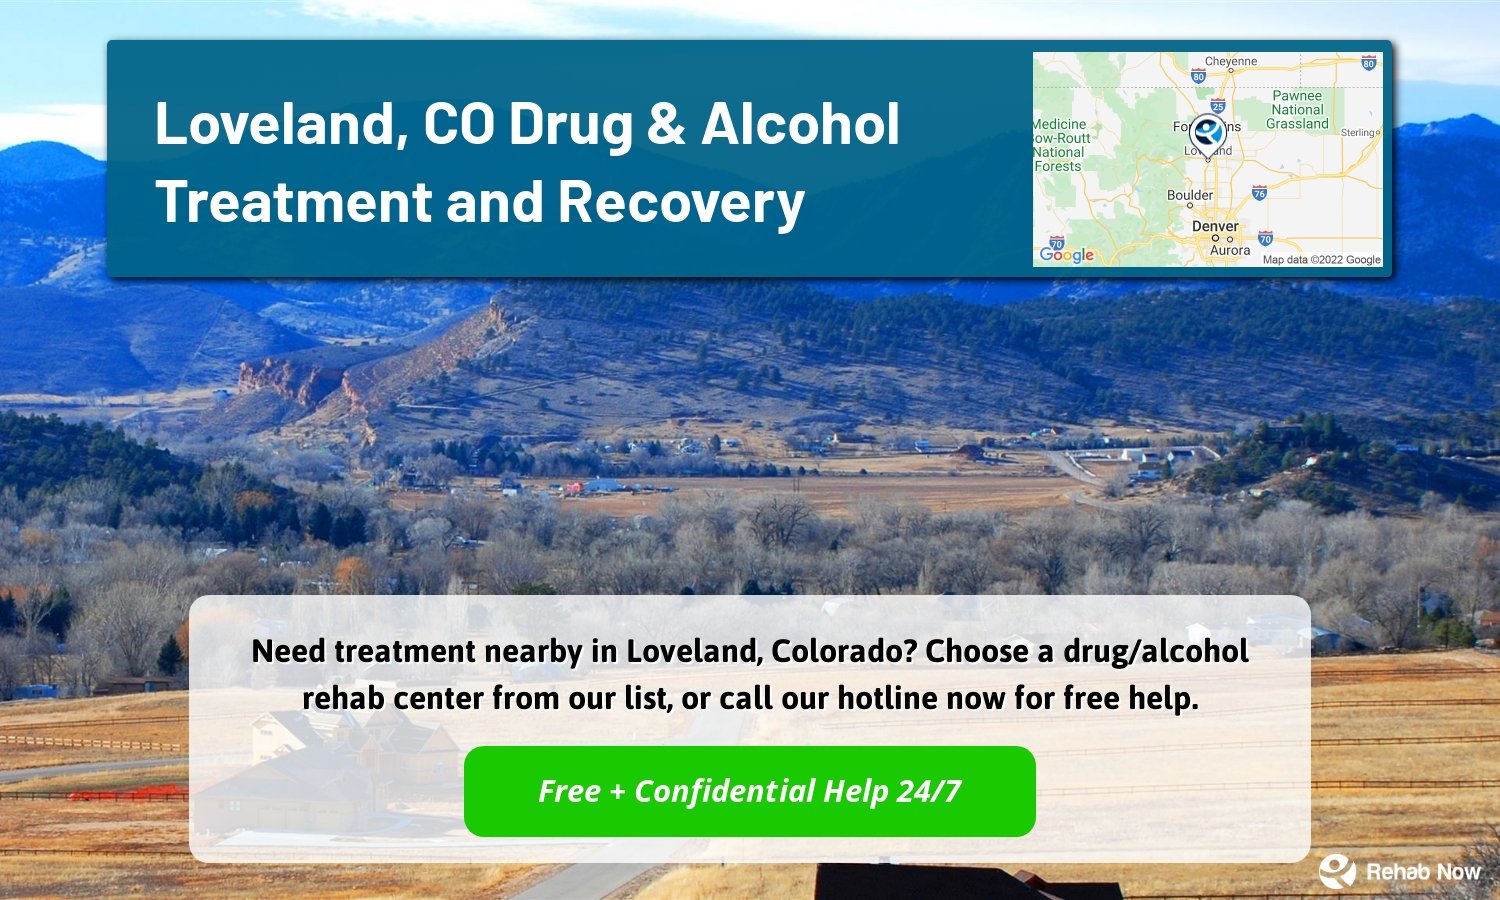 Need treatment nearby in Loveland, Colorado? Choose a drug/alcohol rehab center from our list, or call our hotline now for free help.